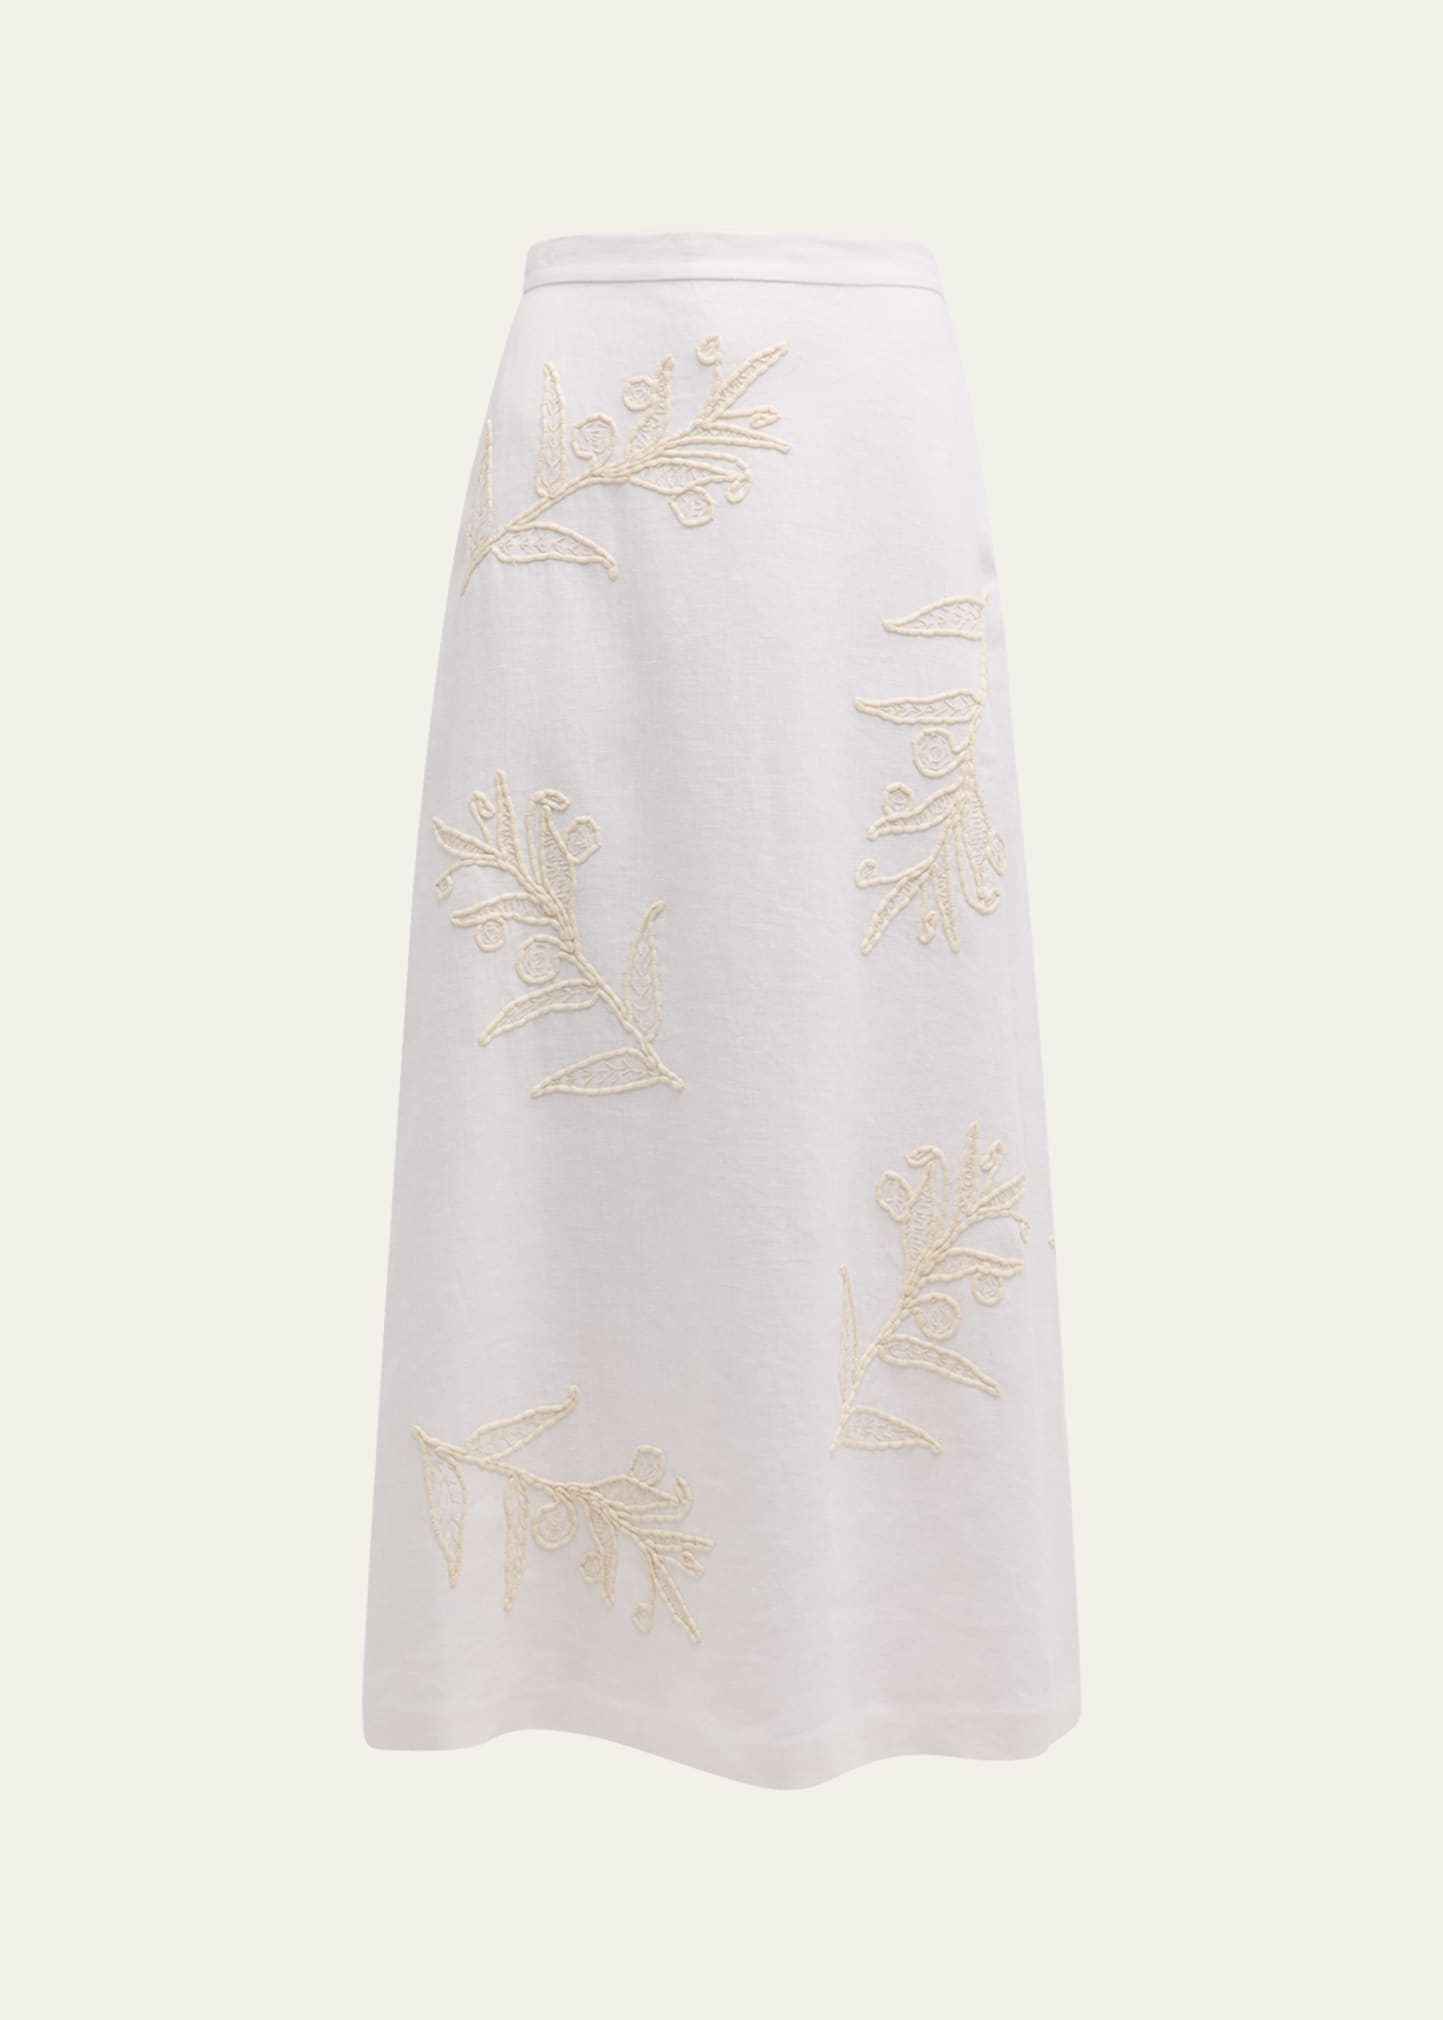 Embroidered A-Line Maxi Skirt